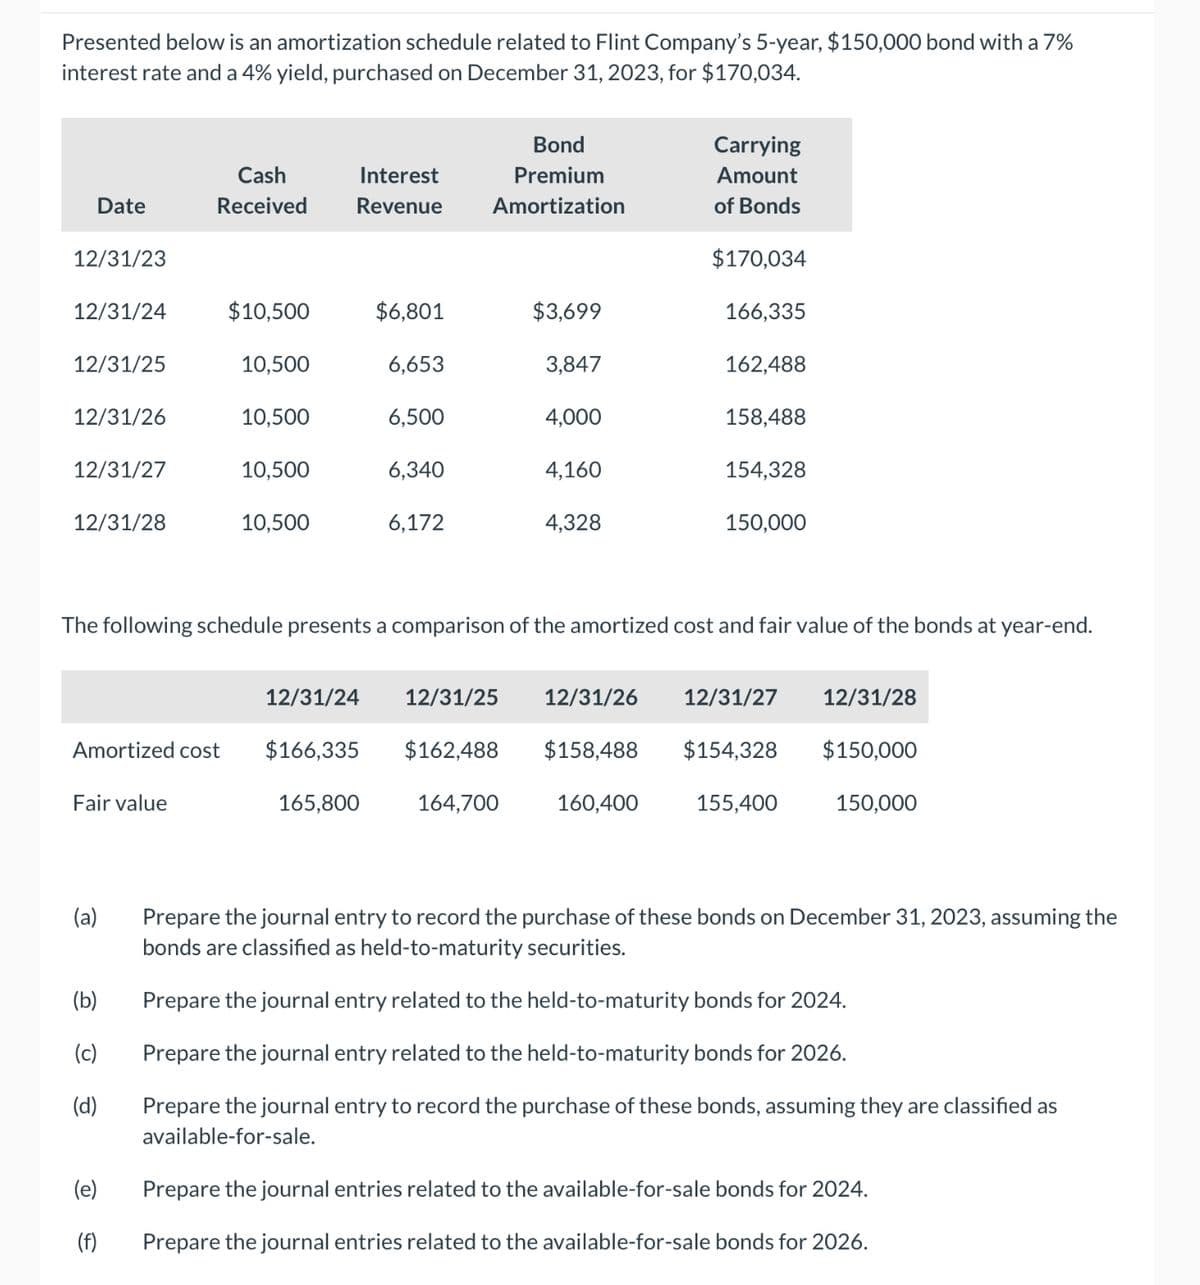 Presented below is an amortization schedule related to Flint Company's 5-year, $150,000 bond with a 7%
interest rate and a 4% yield, purchased on December 31, 2023, for $170,034.
Date
Cash
Received
Interest
Revenue
Bond
Premium
Carrying
Amount
Amortization
of Bonds
12/31/23
$170,034
12/31/24
$10,500
$6,801
$3,699
166,335
12/31/25
10,500
6,653
3,847
162,488
12/31/26
10,500
6,500
4,000
158,488
12/31/27
10,500
6,340
4,160
154,328
12/31/28
10,500
6,172
4,328
150,000
The following schedule presents a comparison of the amortized cost and fair value of the bonds at year-end.
12/31/24 12/31/25 12/31/26
12/31/27
12/31/28
Amortized cost $166,335 $162,488
$158,488
$154,328
$150,000
Fair value
165,800
164,700
160,400
155,400
150,000
(a)
Prepare the journal entry to record the purchase of these bonds on December 31, 2023, assuming the
bonds are classified as held-to-maturity securities.
(b)
Prepare the journal entry related to the held-to-maturity bonds for 2024.
(c)
Prepare the journal entry related to the held-to-maturity bonds for 2026.
(d)
Prepare the journal entry to record the purchase of these bonds, assuming they are classified as
available-for-sale.
(e)
Prepare the journal entries related to the available-for-sale bonds for 2024.
(f)
Prepare the journal entries related to the available-for-sale bonds for 2026.